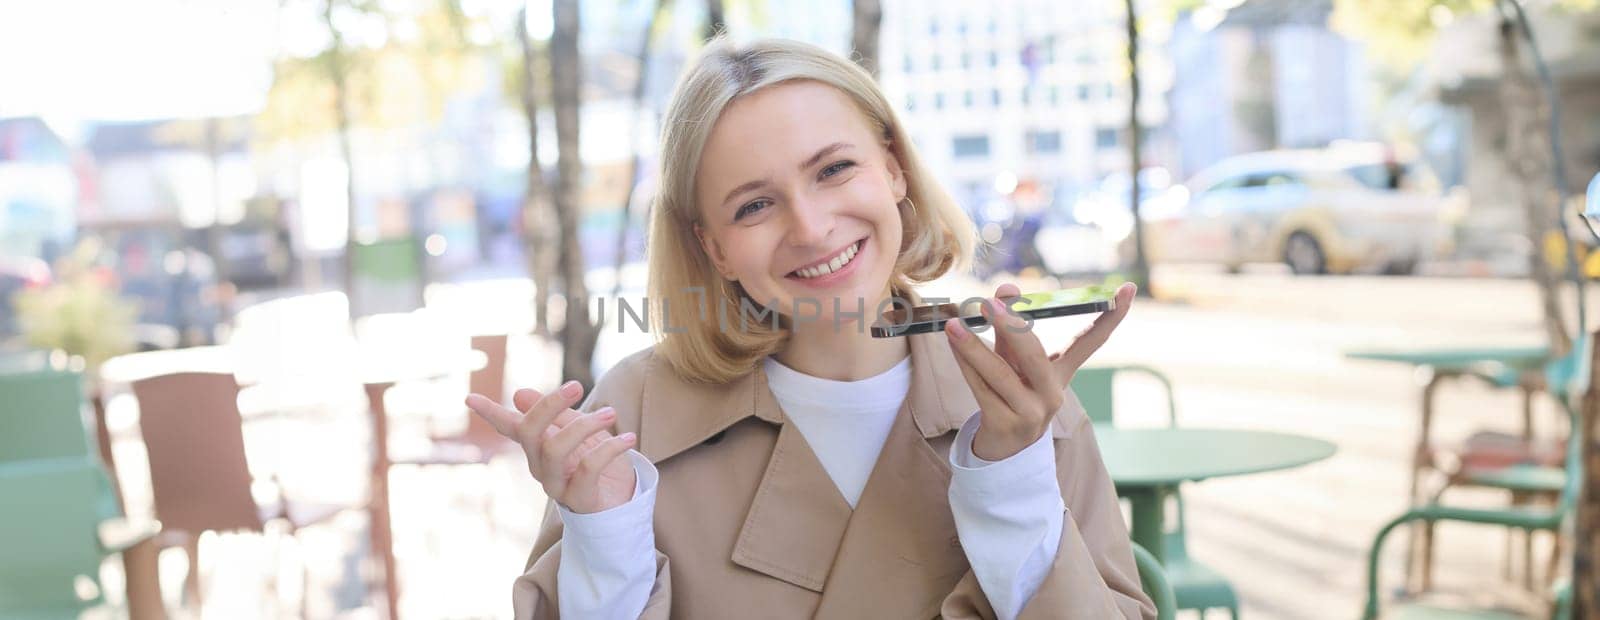 Close up portrait of smiling blond woman, girl with mobile phone outdoors, sitting in cafe, recording voice message, talking into smartphone with microphone near mouth.